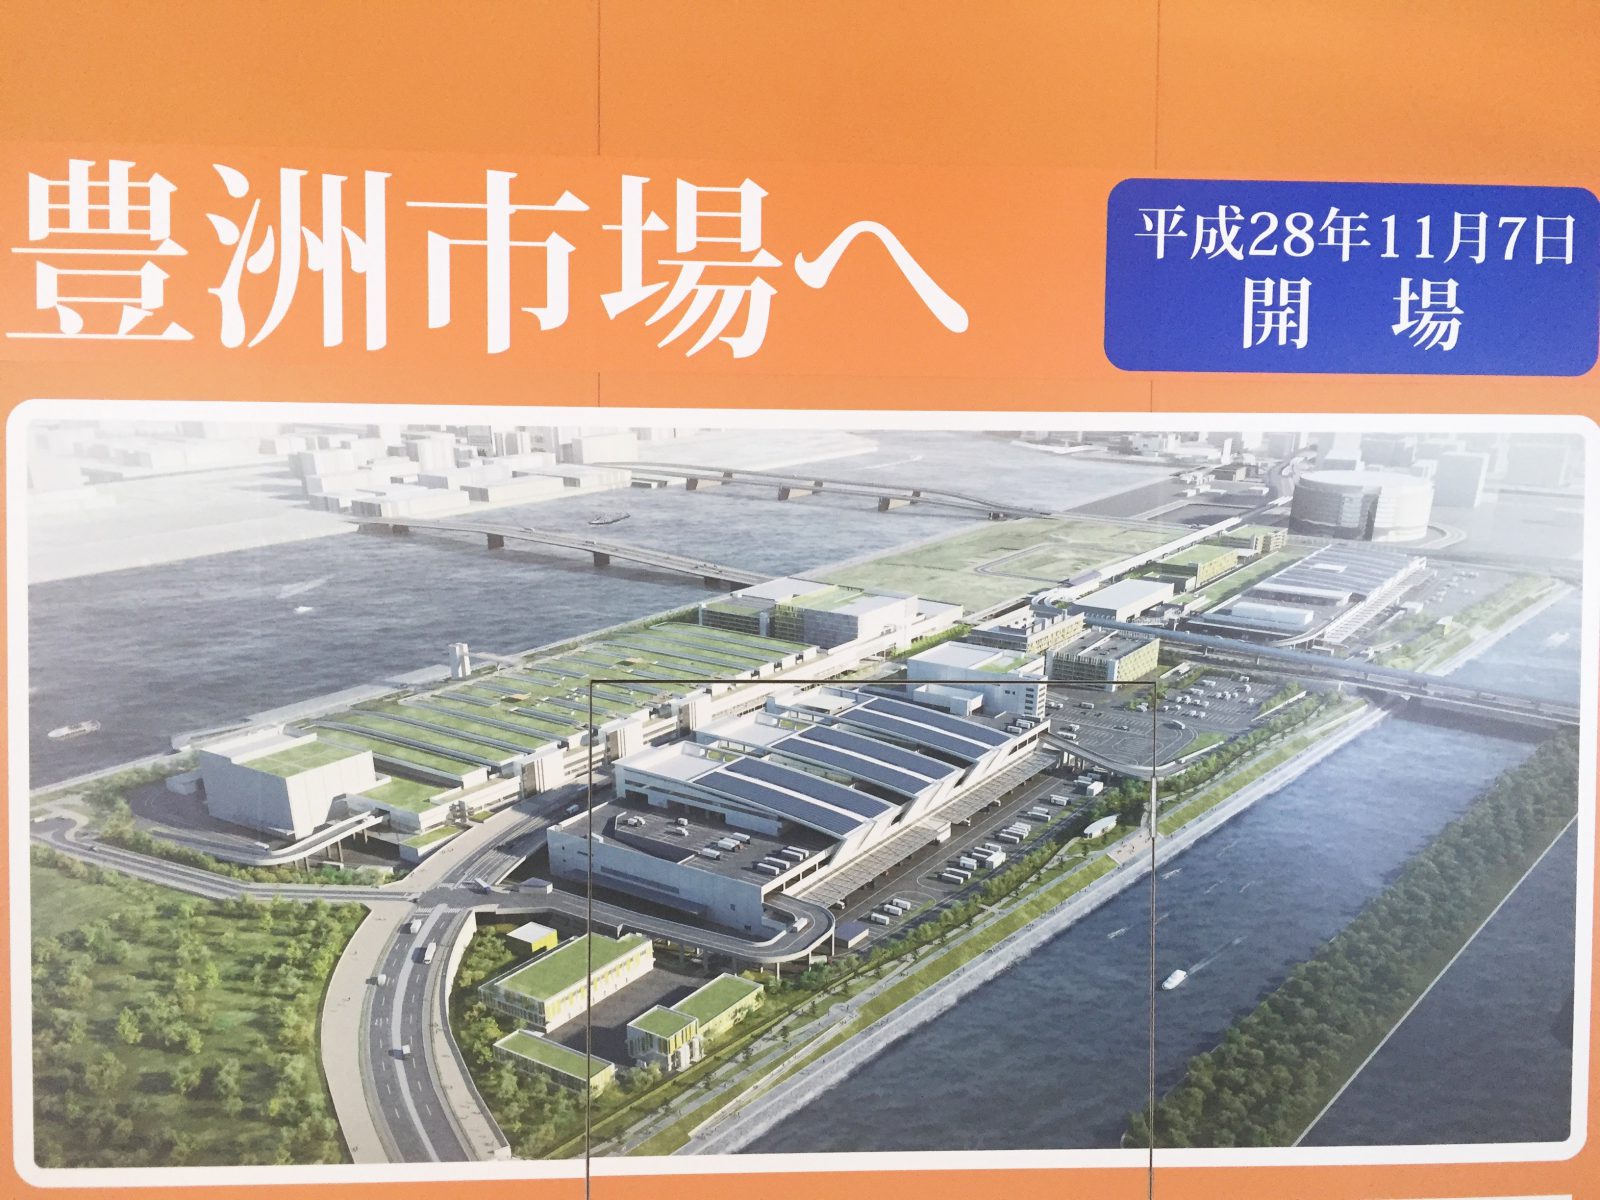 This is how new Tsukiji will look like